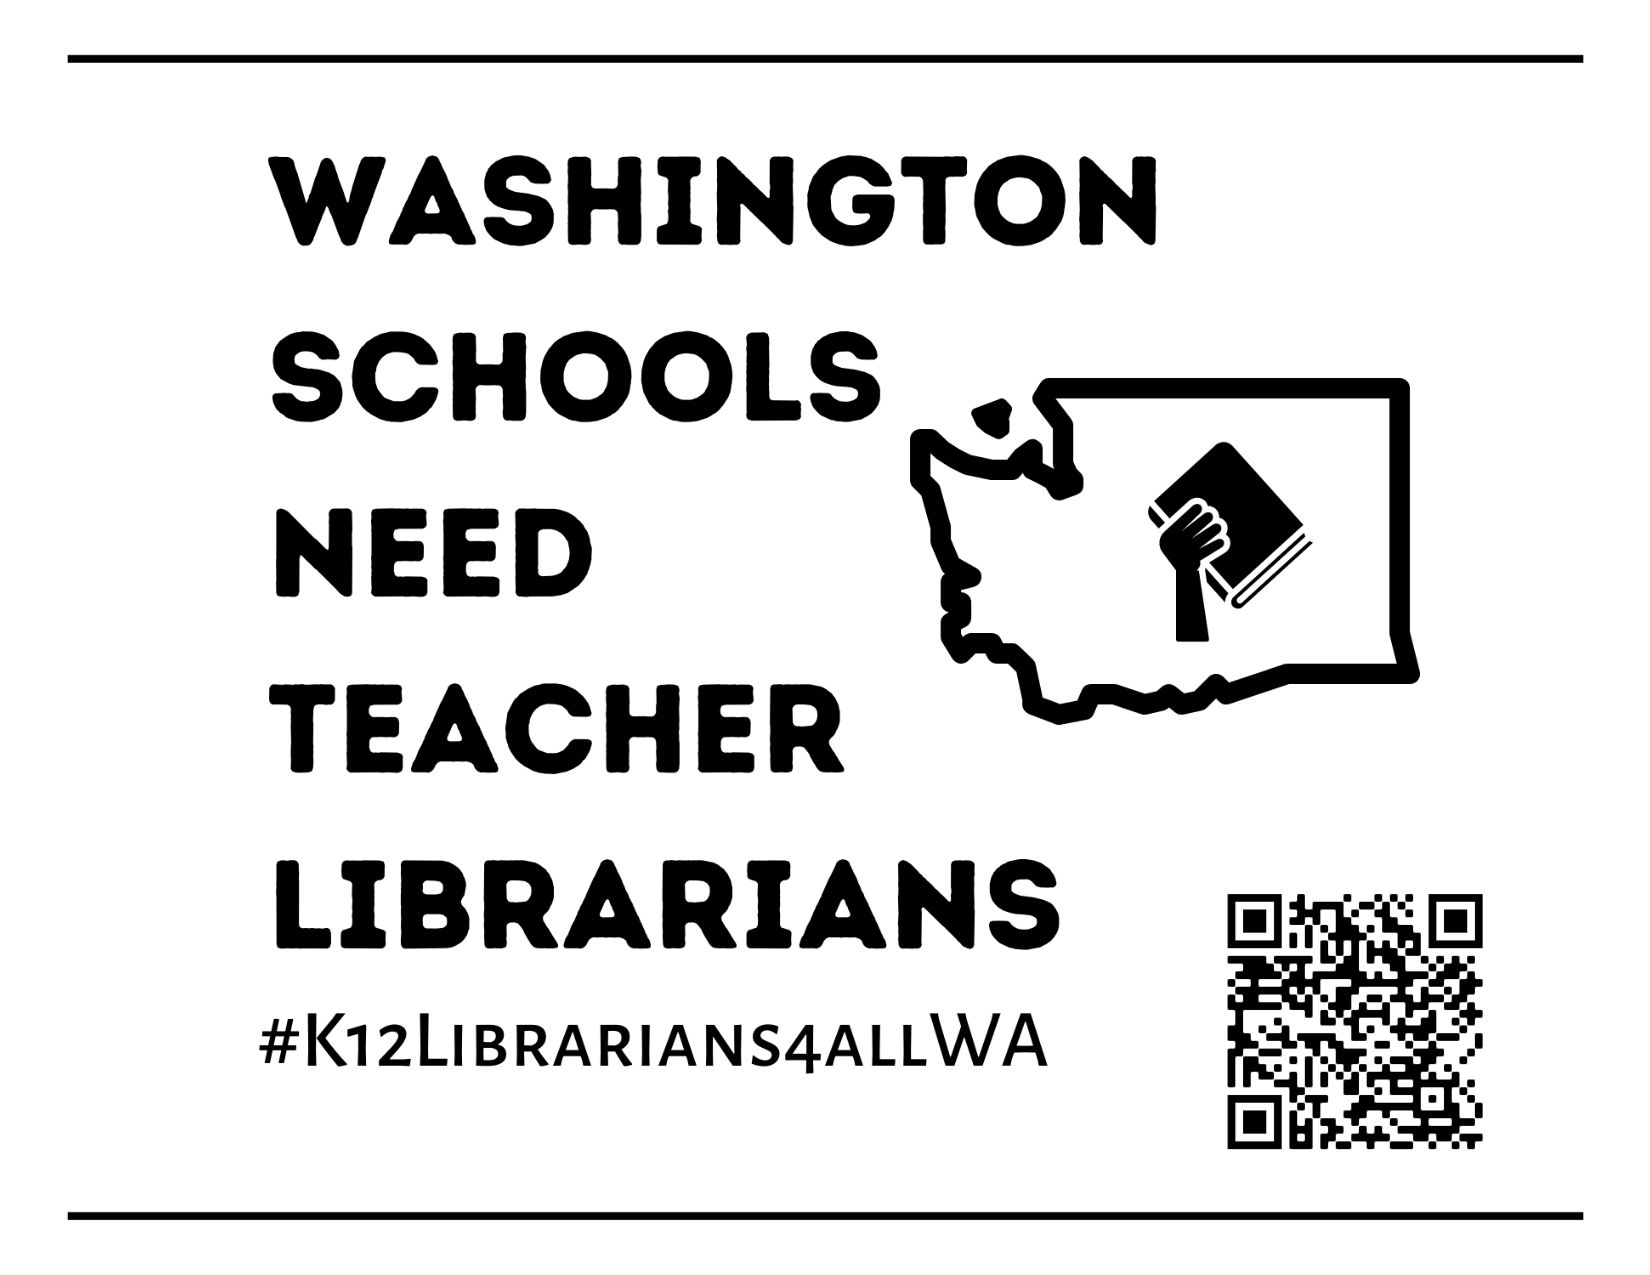 The logo, hashtag, and QR Code for the Washington Needs Teacher Librarians campaign. The hashtag is #K12Librarians4AllWA